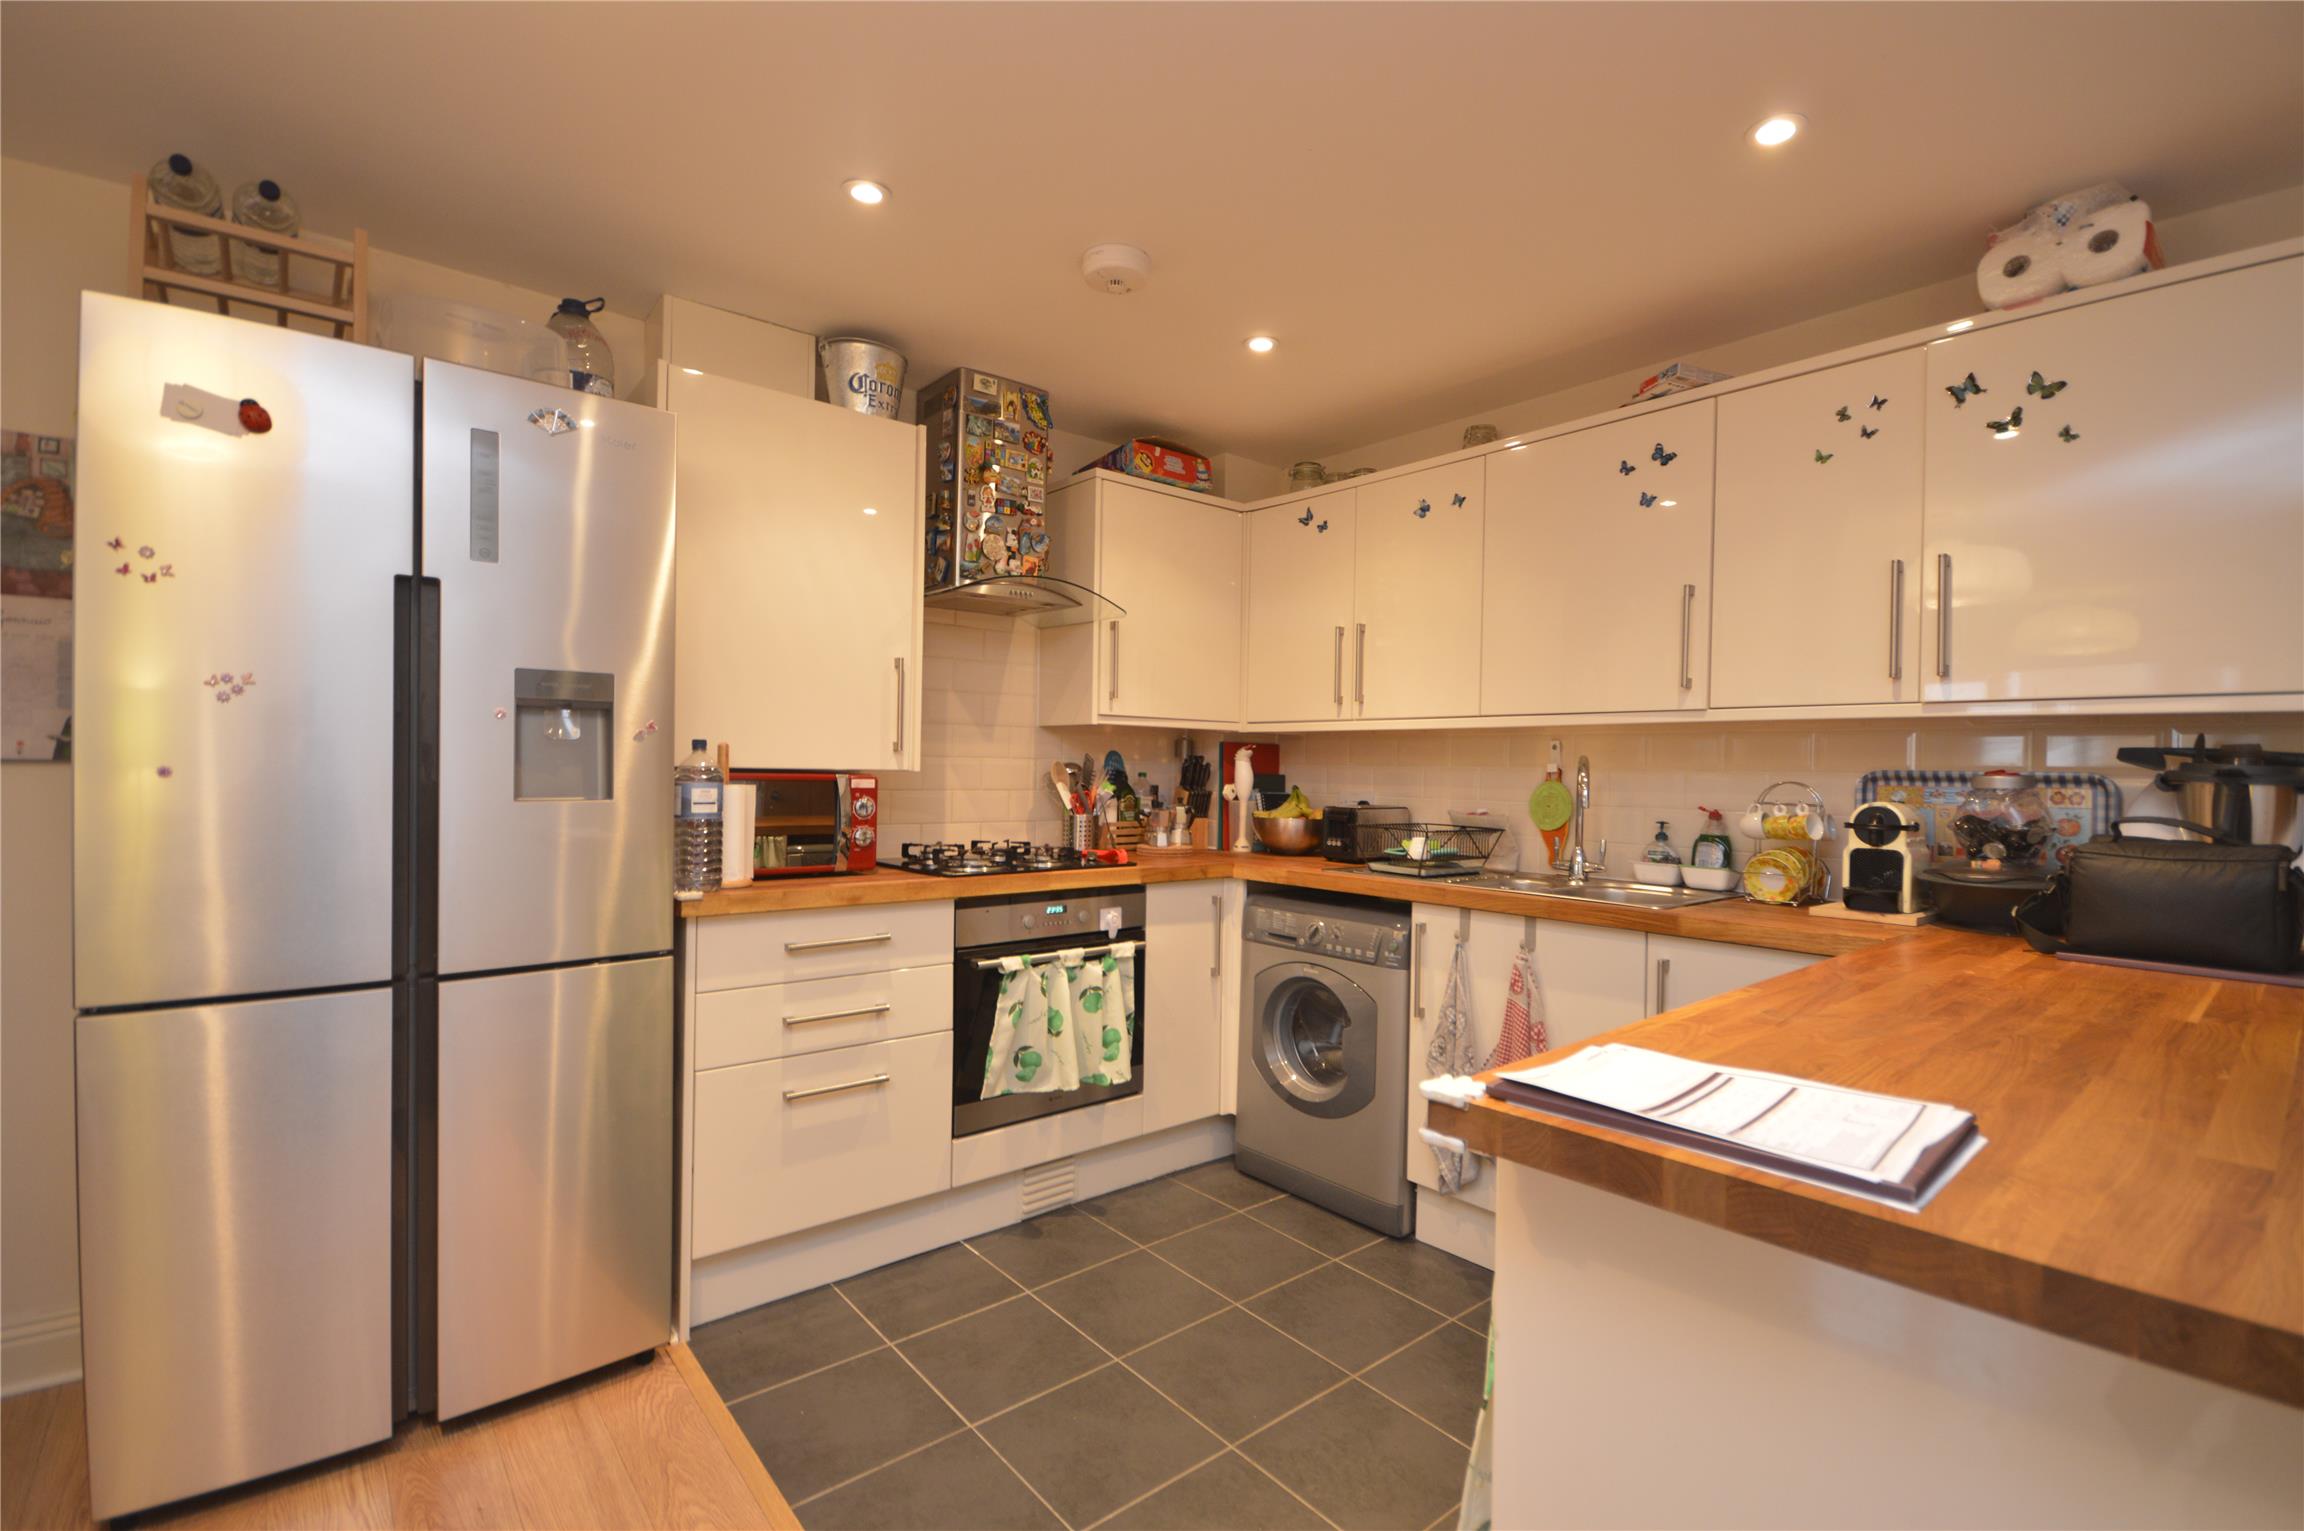 This lovely 2 bedroom property based in the heart of Clapham RoomsLocal image